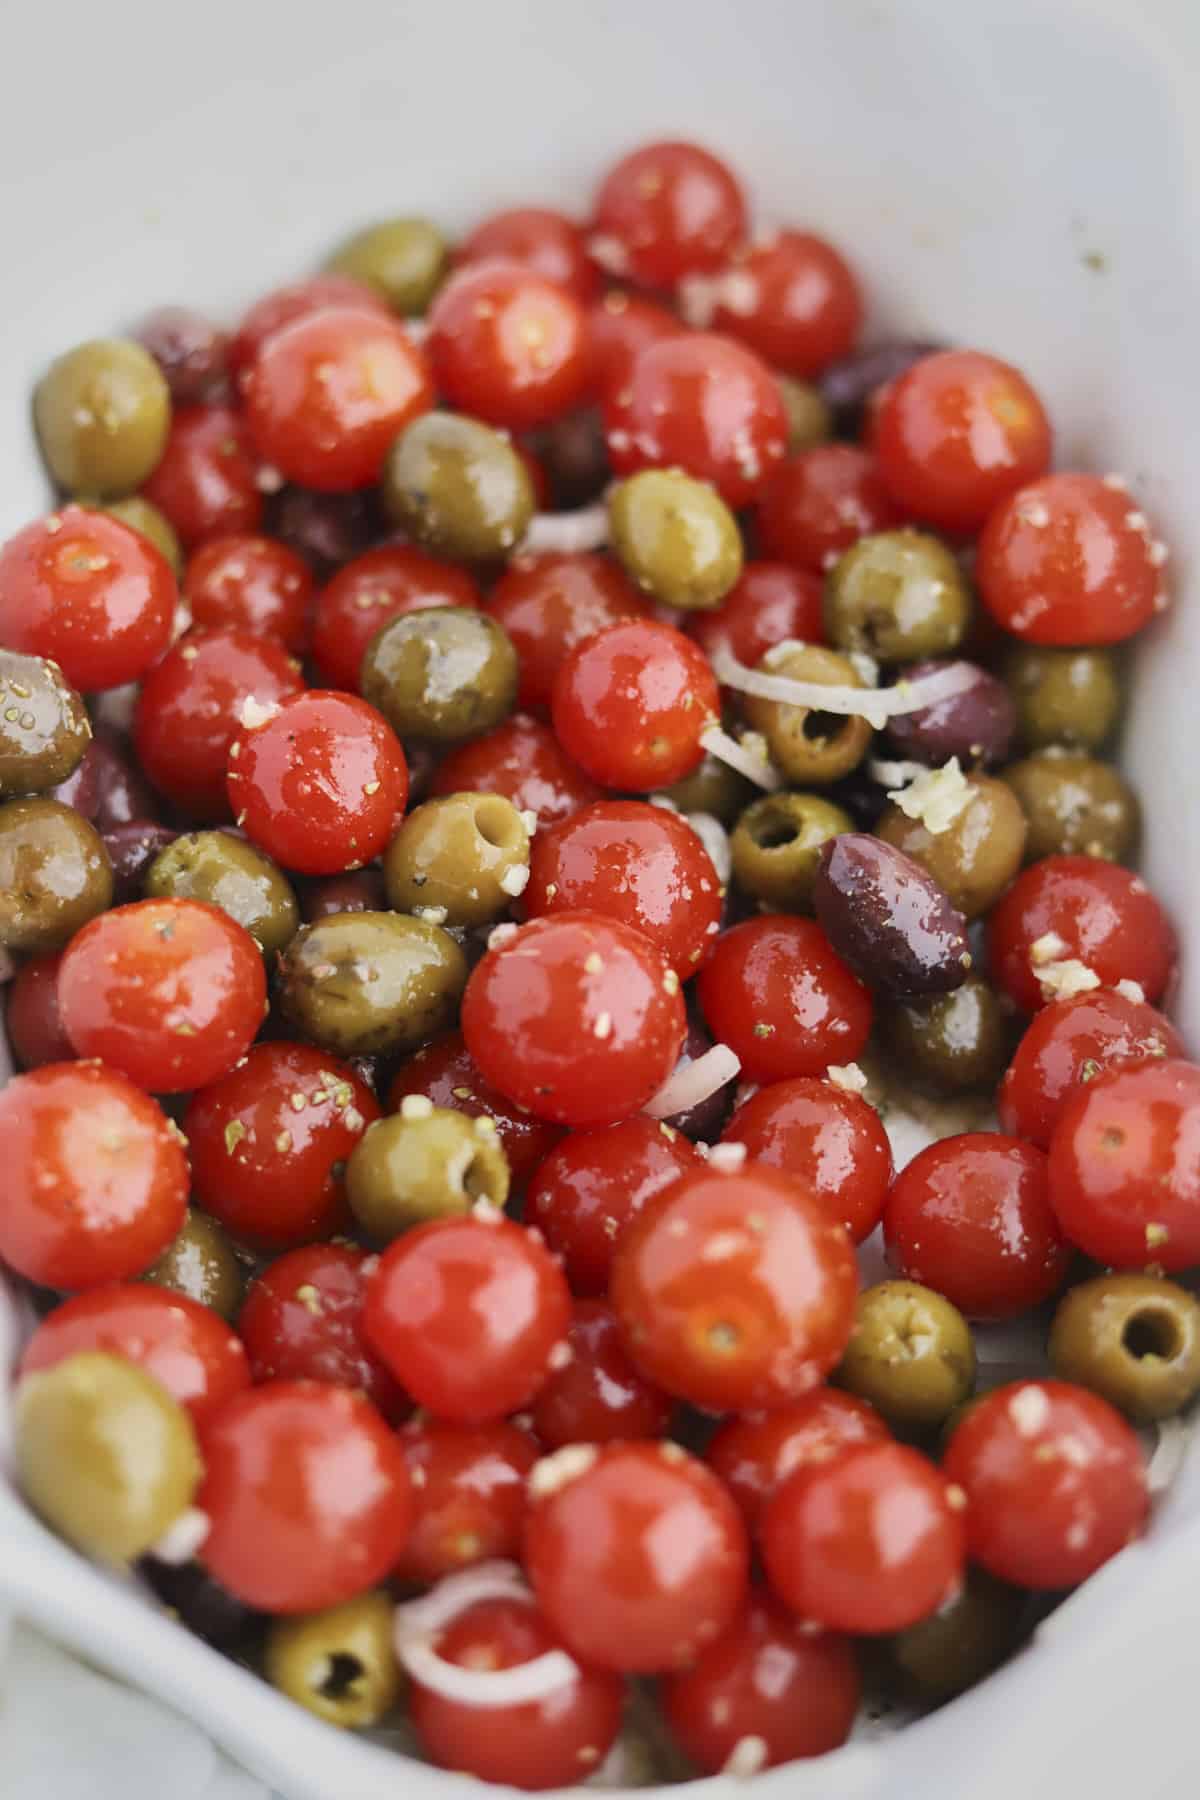 baking dish of tomatoes, olives, onions and olive oil